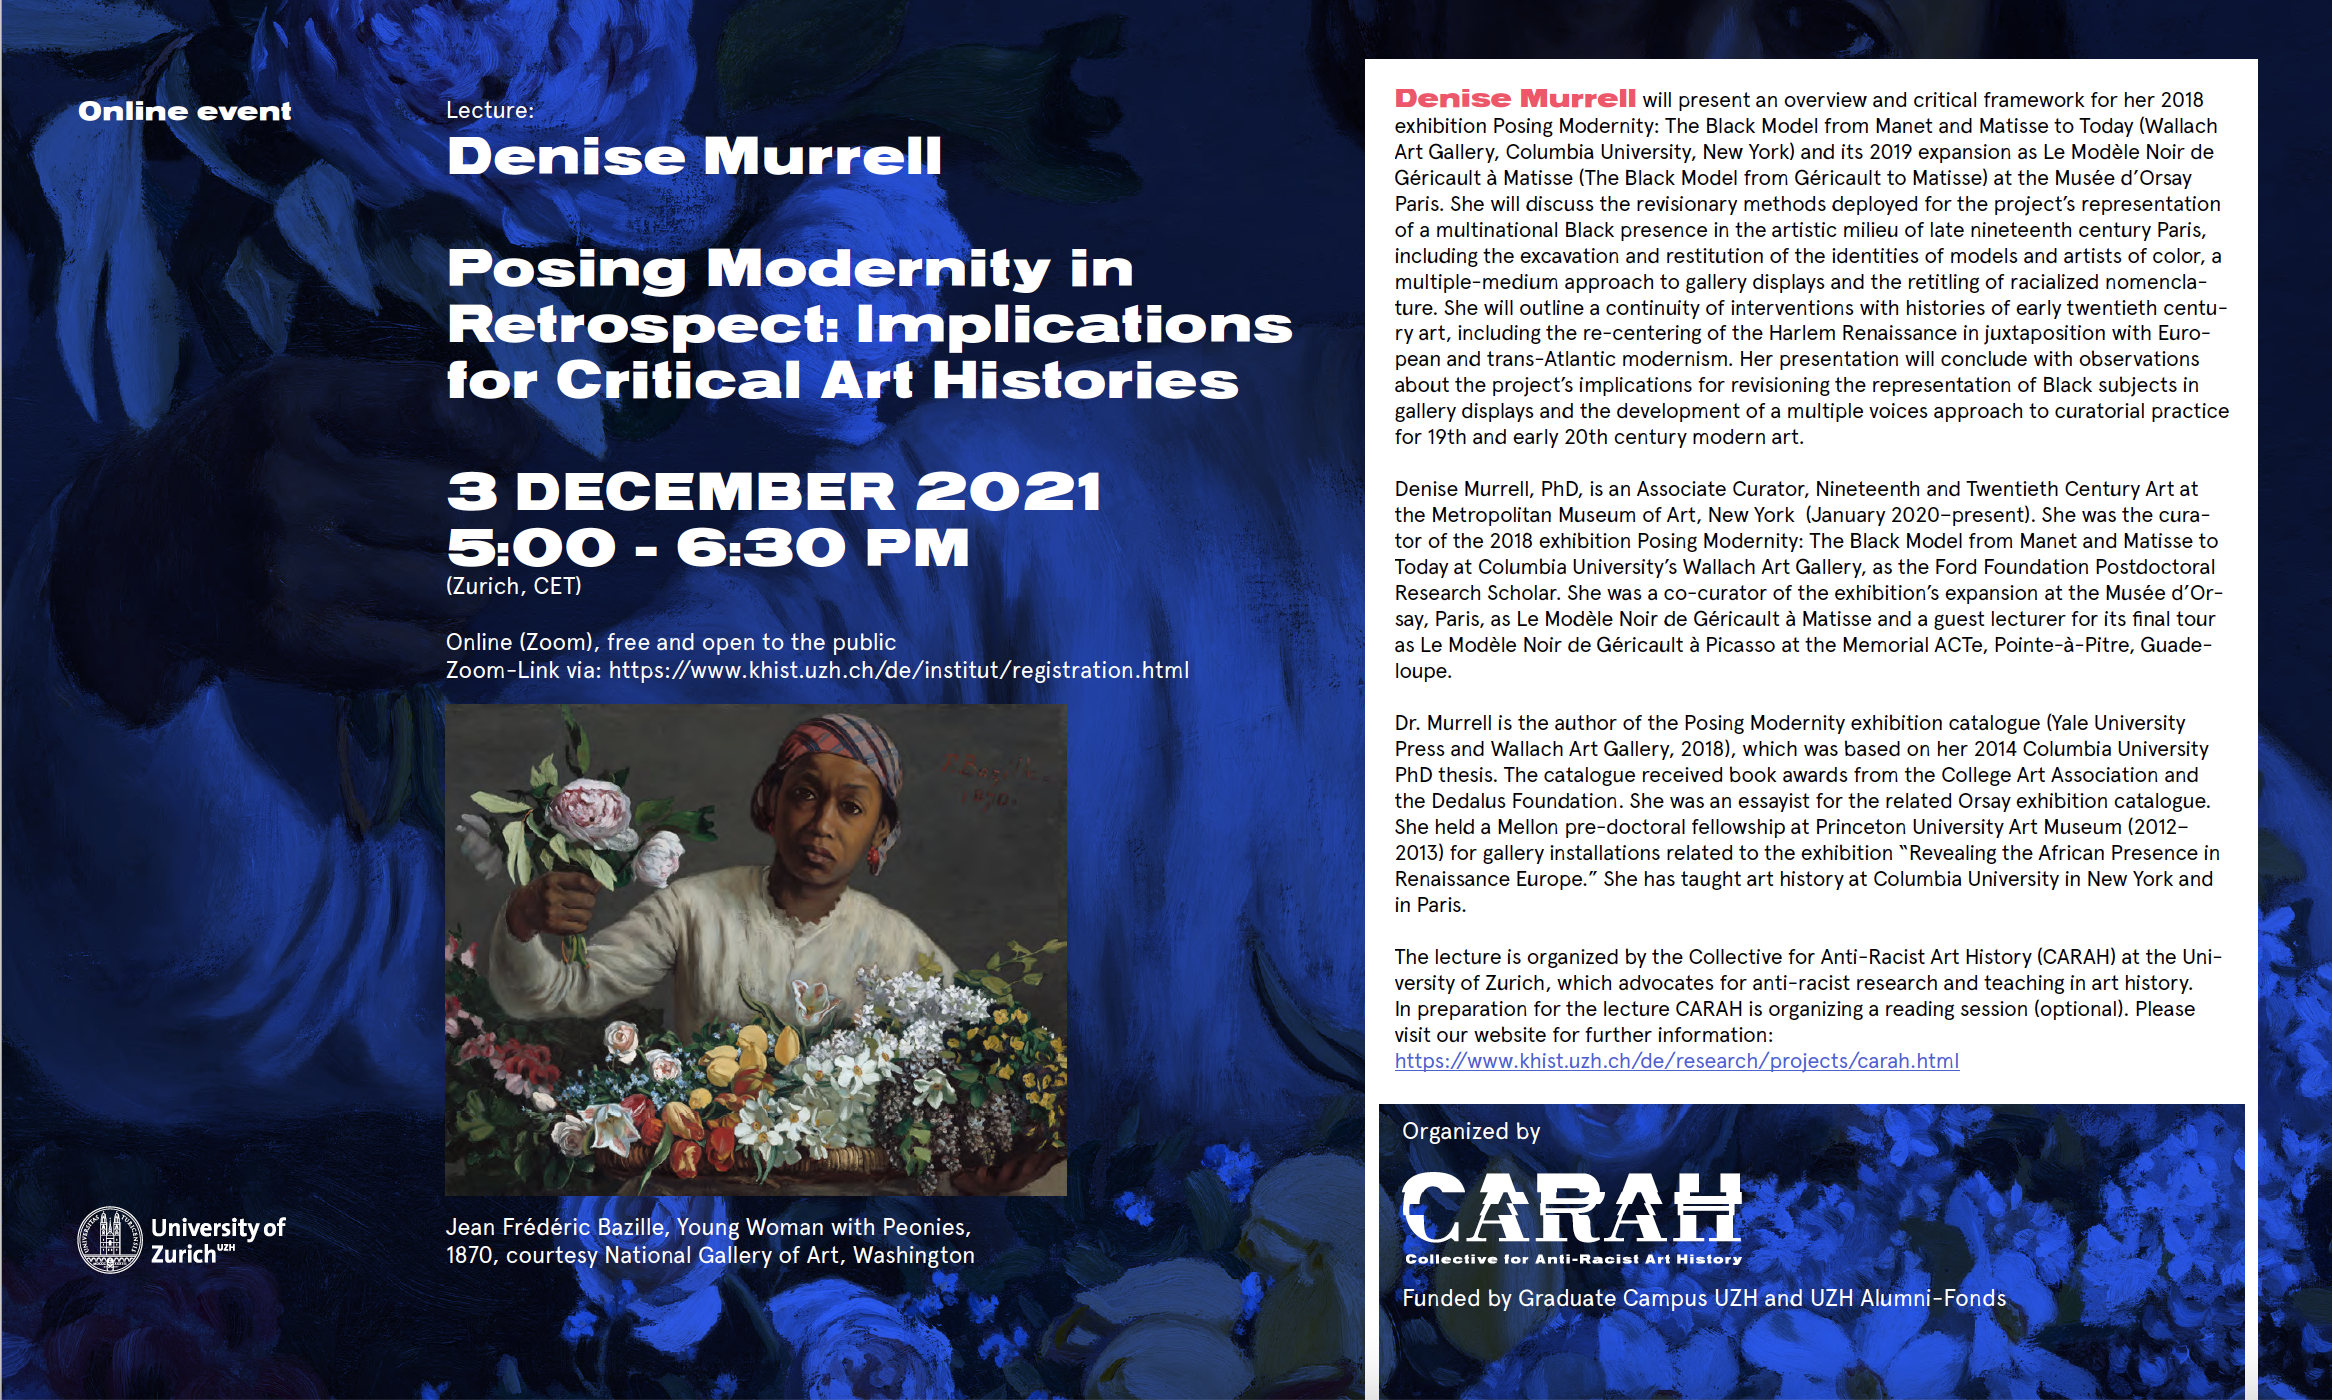 Lecture with Denise Murmel